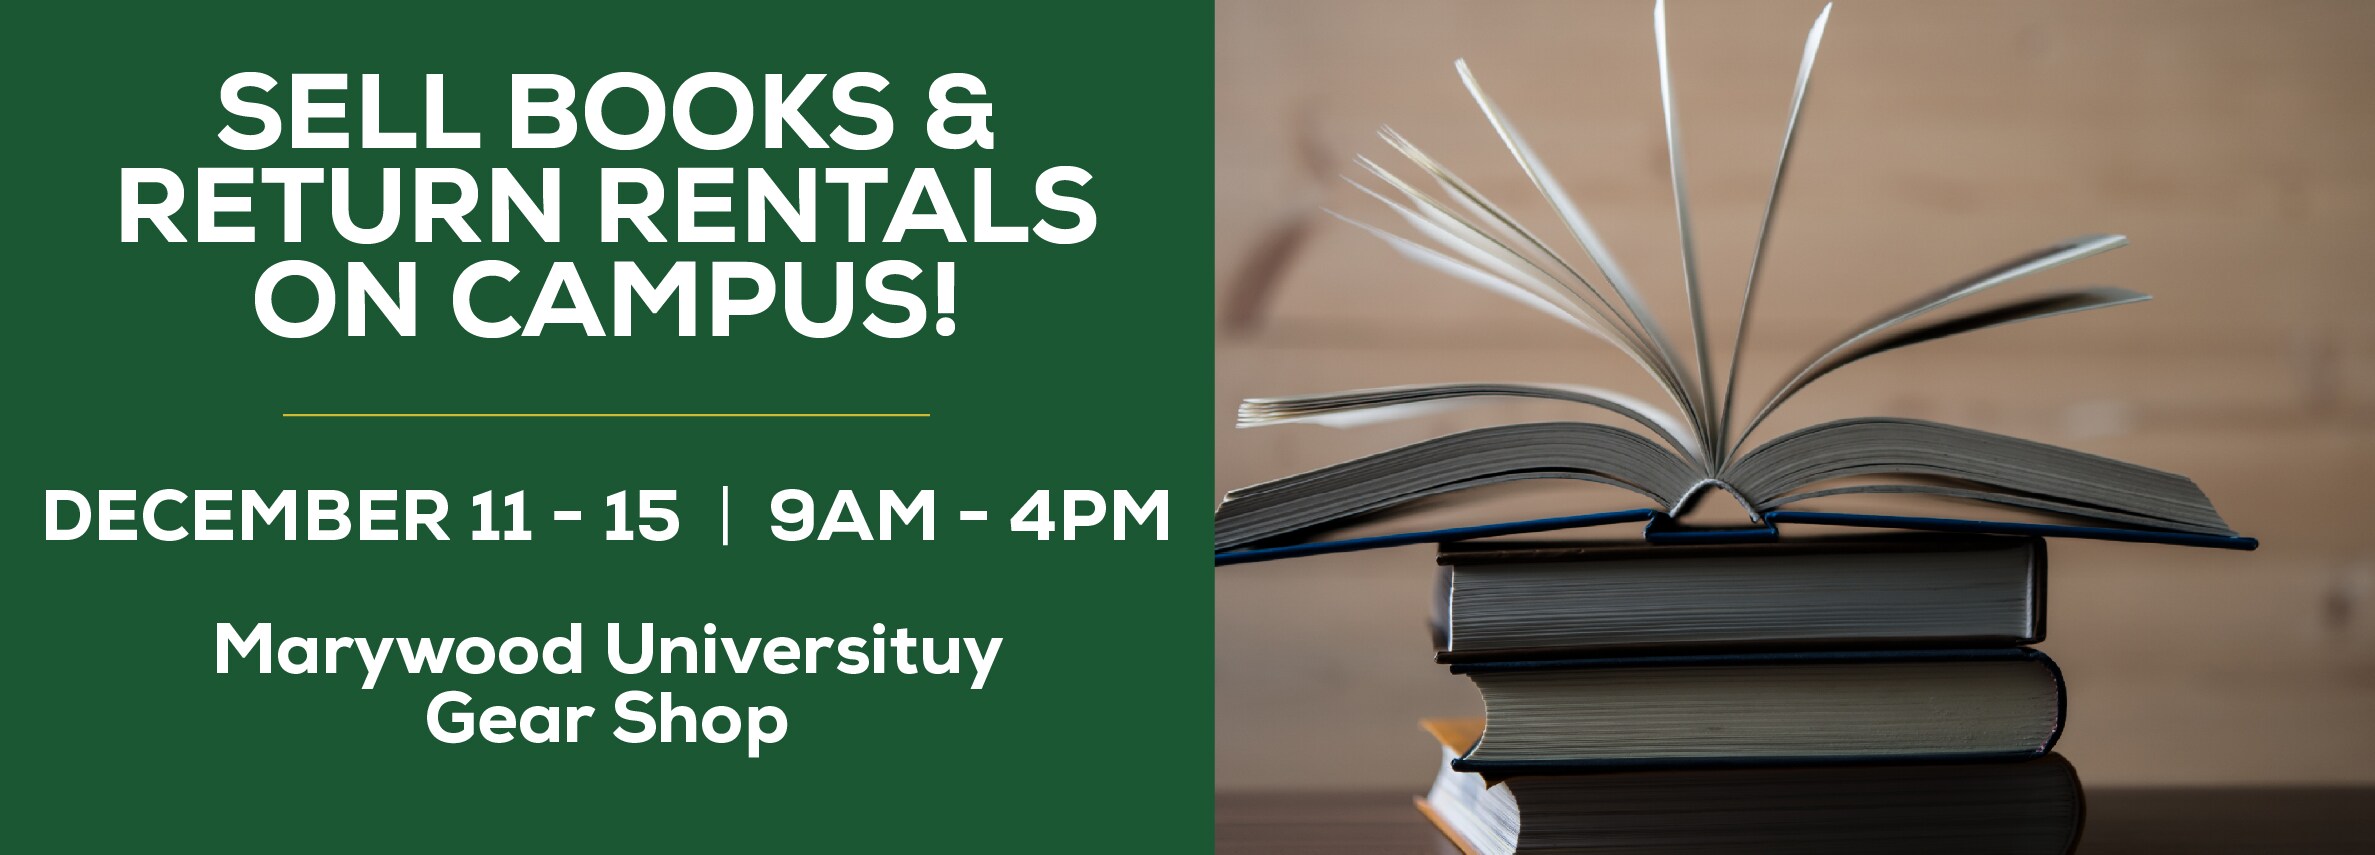 Sell books and return rentals on campus! December 11 through 15. 9am to 4pm at the Gear Shop.